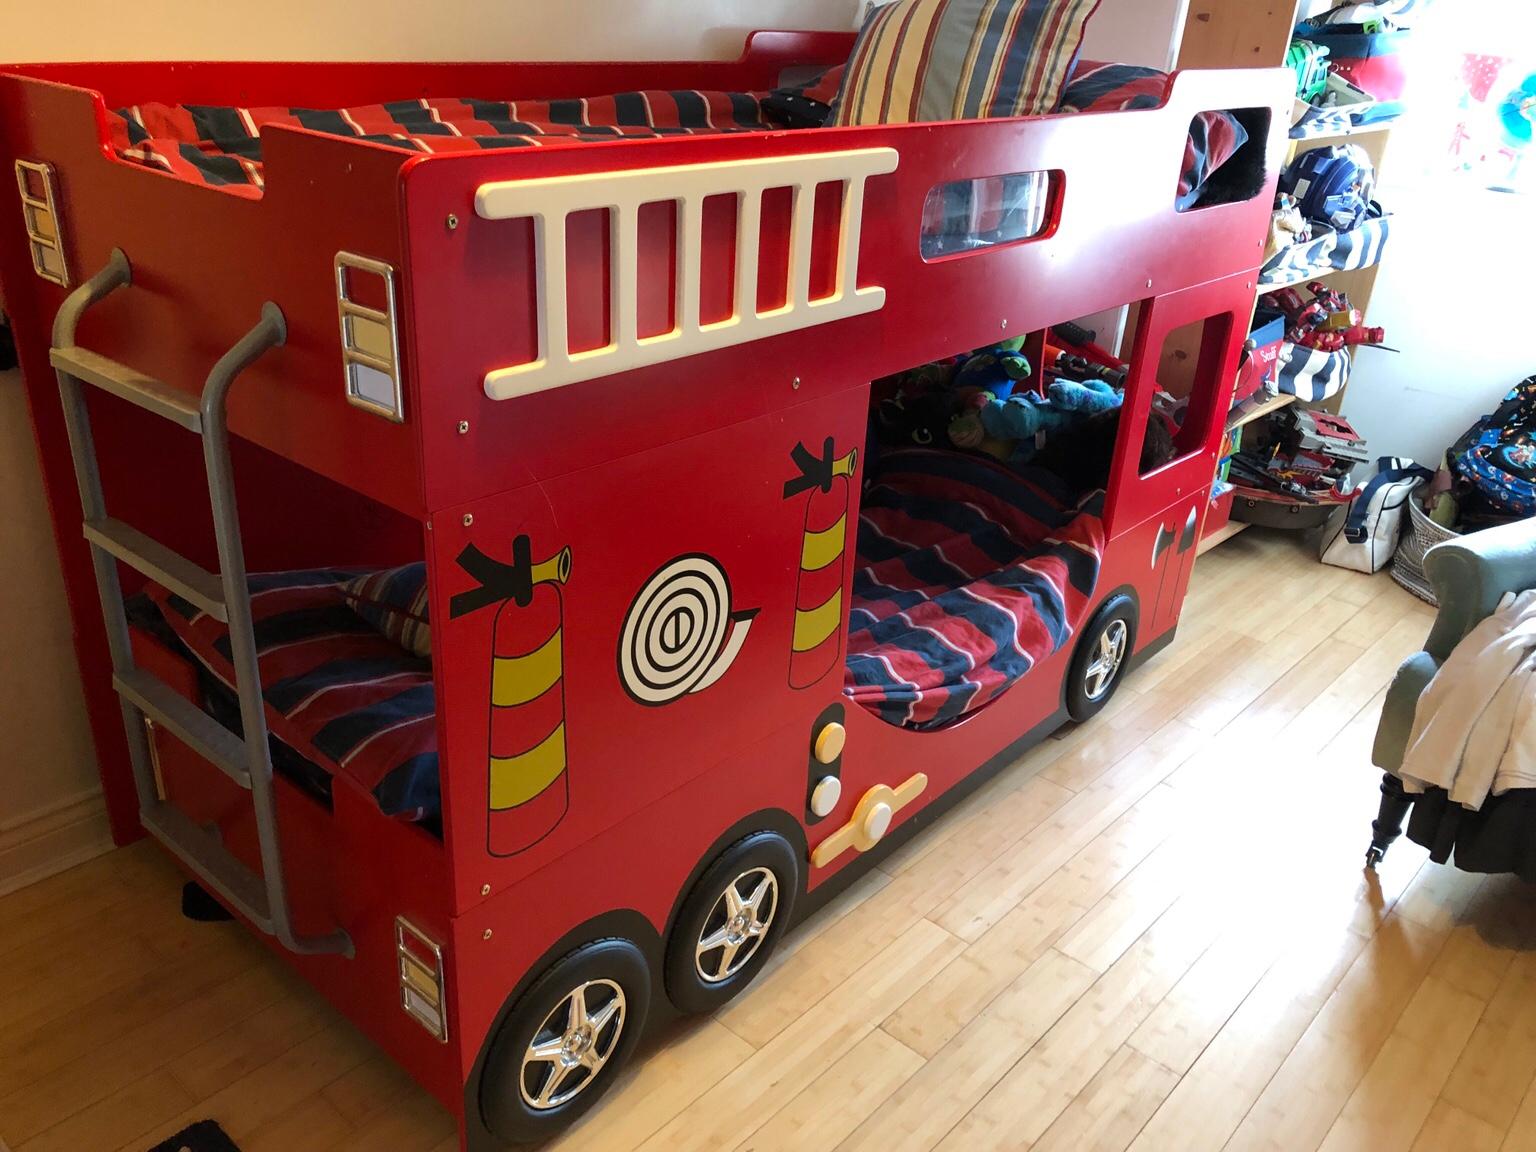 Fire Engine Bunk Bed In St18 Stafford, Diy Fire Truck Bunk Bed